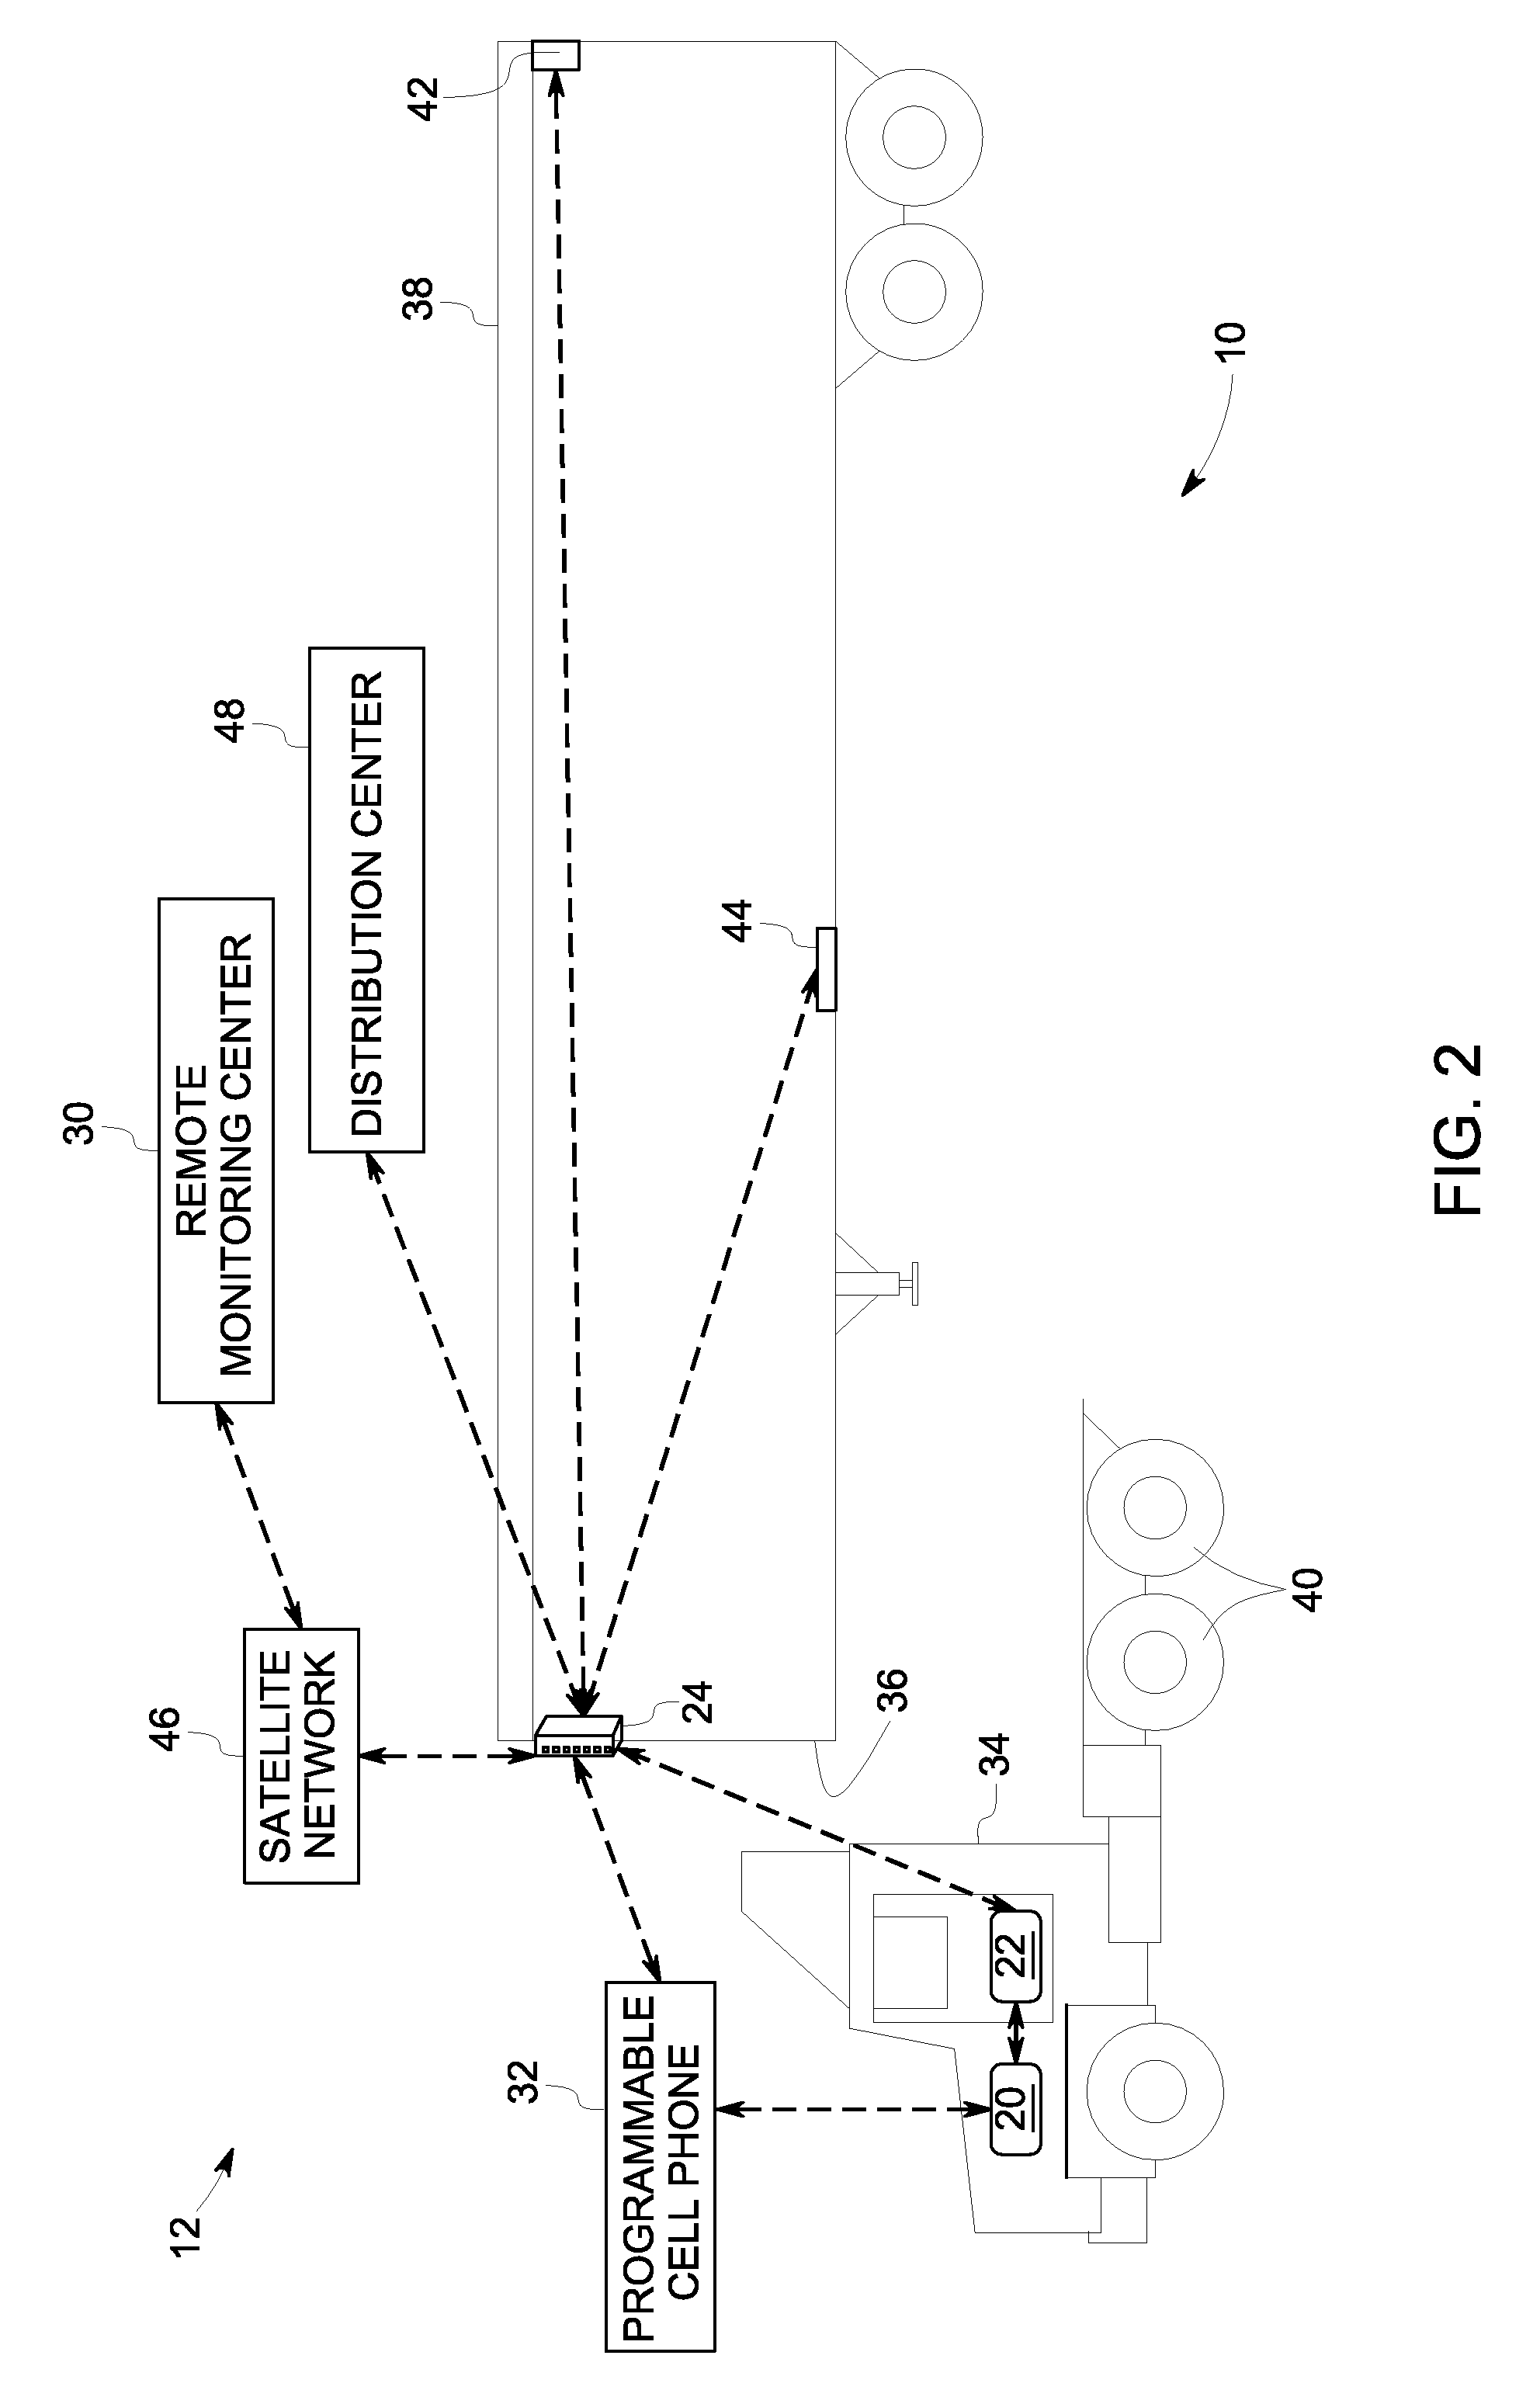 System and method for providing asset management and tracking capabilities